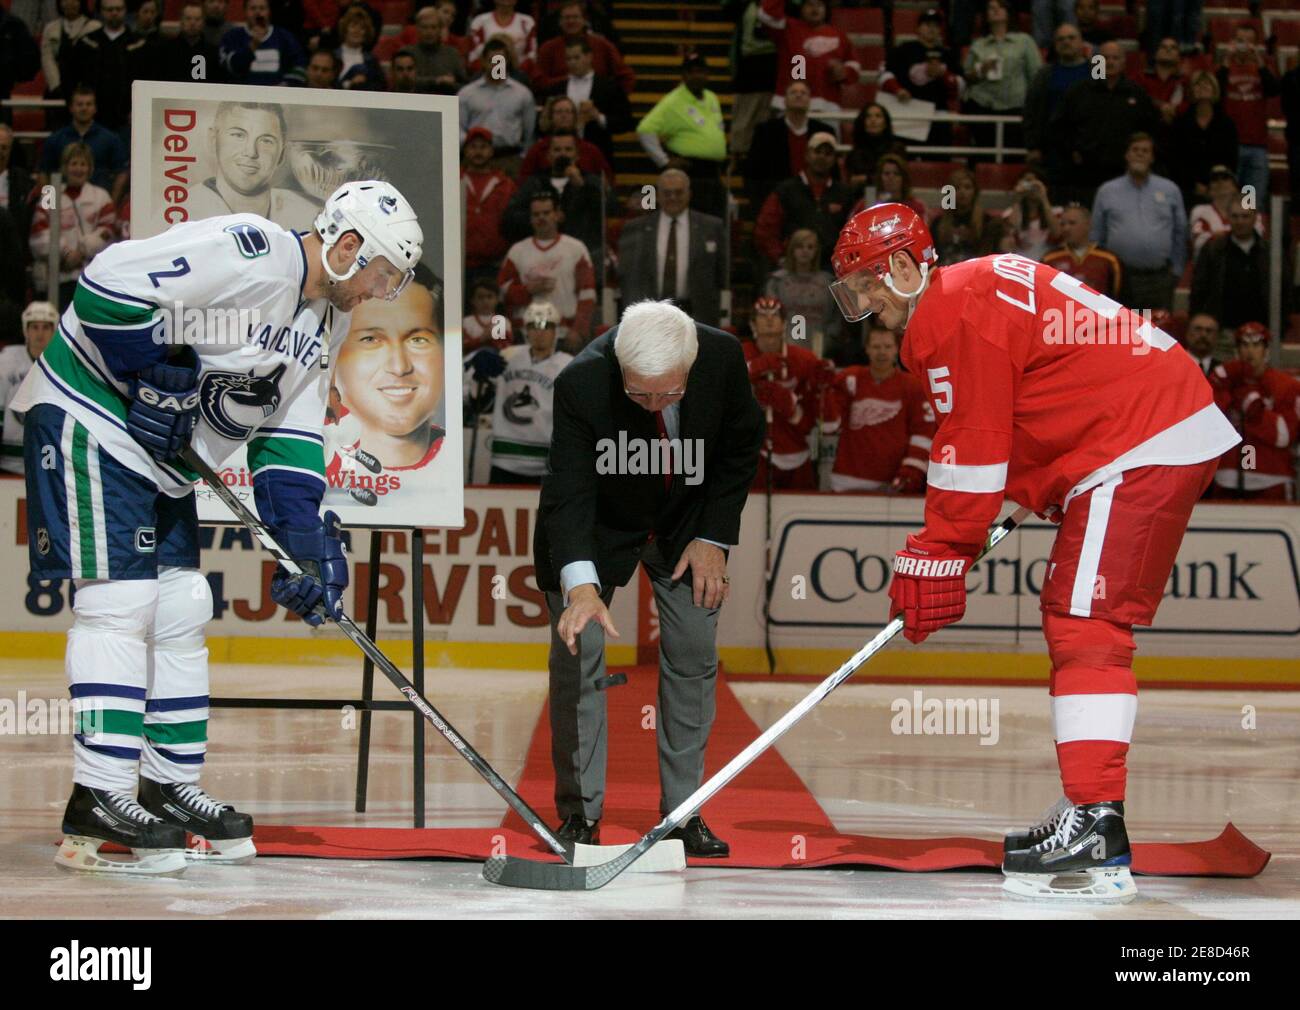 Detroit Red Wing alumnus Alex Delvecchio drops the ceremonial puck between  Vancouver Canucks Mattias Ohlund (L) and Red Wings Nicklas Lidstrom (R)  before the start of their NHL hockey game in Detroit,